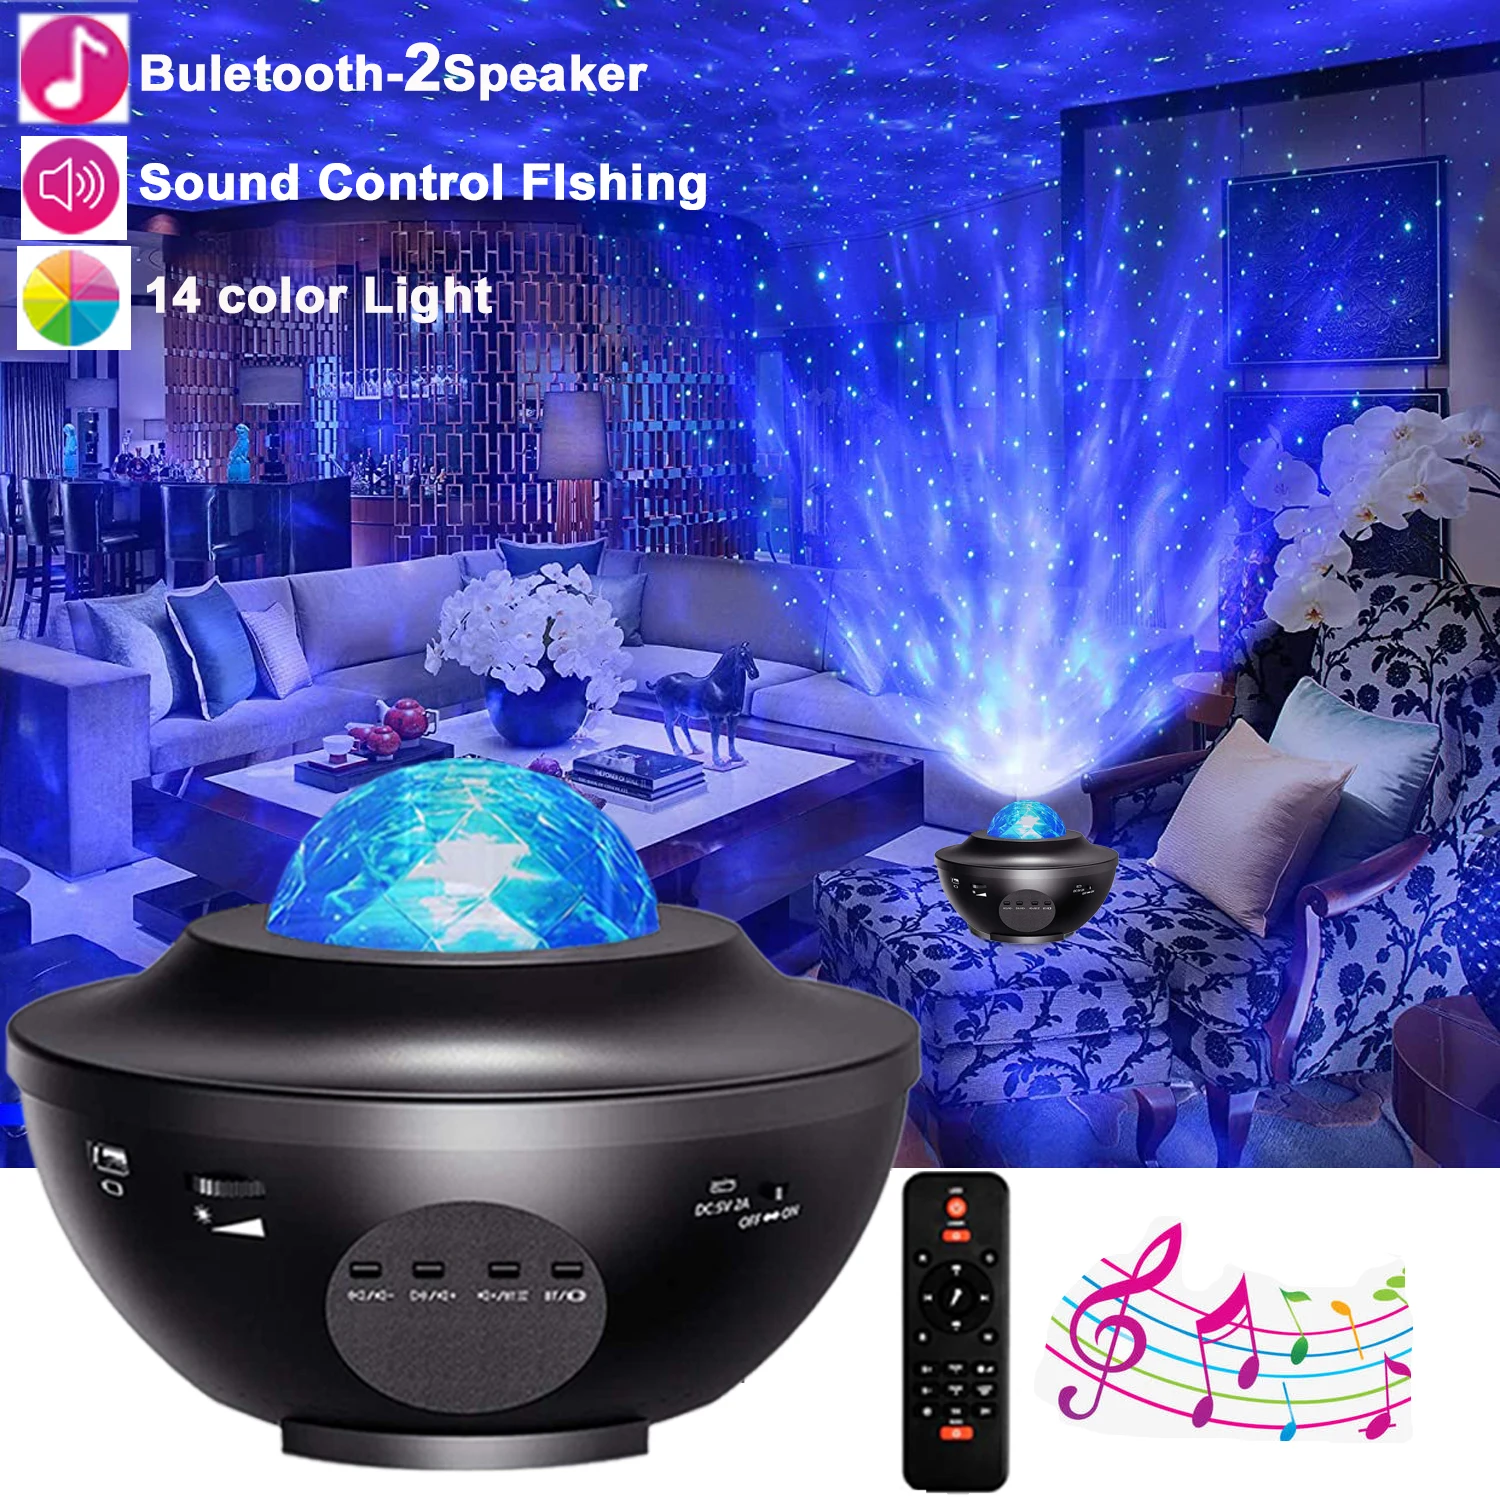 Ocean Wave Cloud Lamp Bluetooth-Speaker Galaxy Starry Sky Projector Night Light  For Bedroom Party Decoration  Kids Adults Gifts dinosaur lamp Night Lights